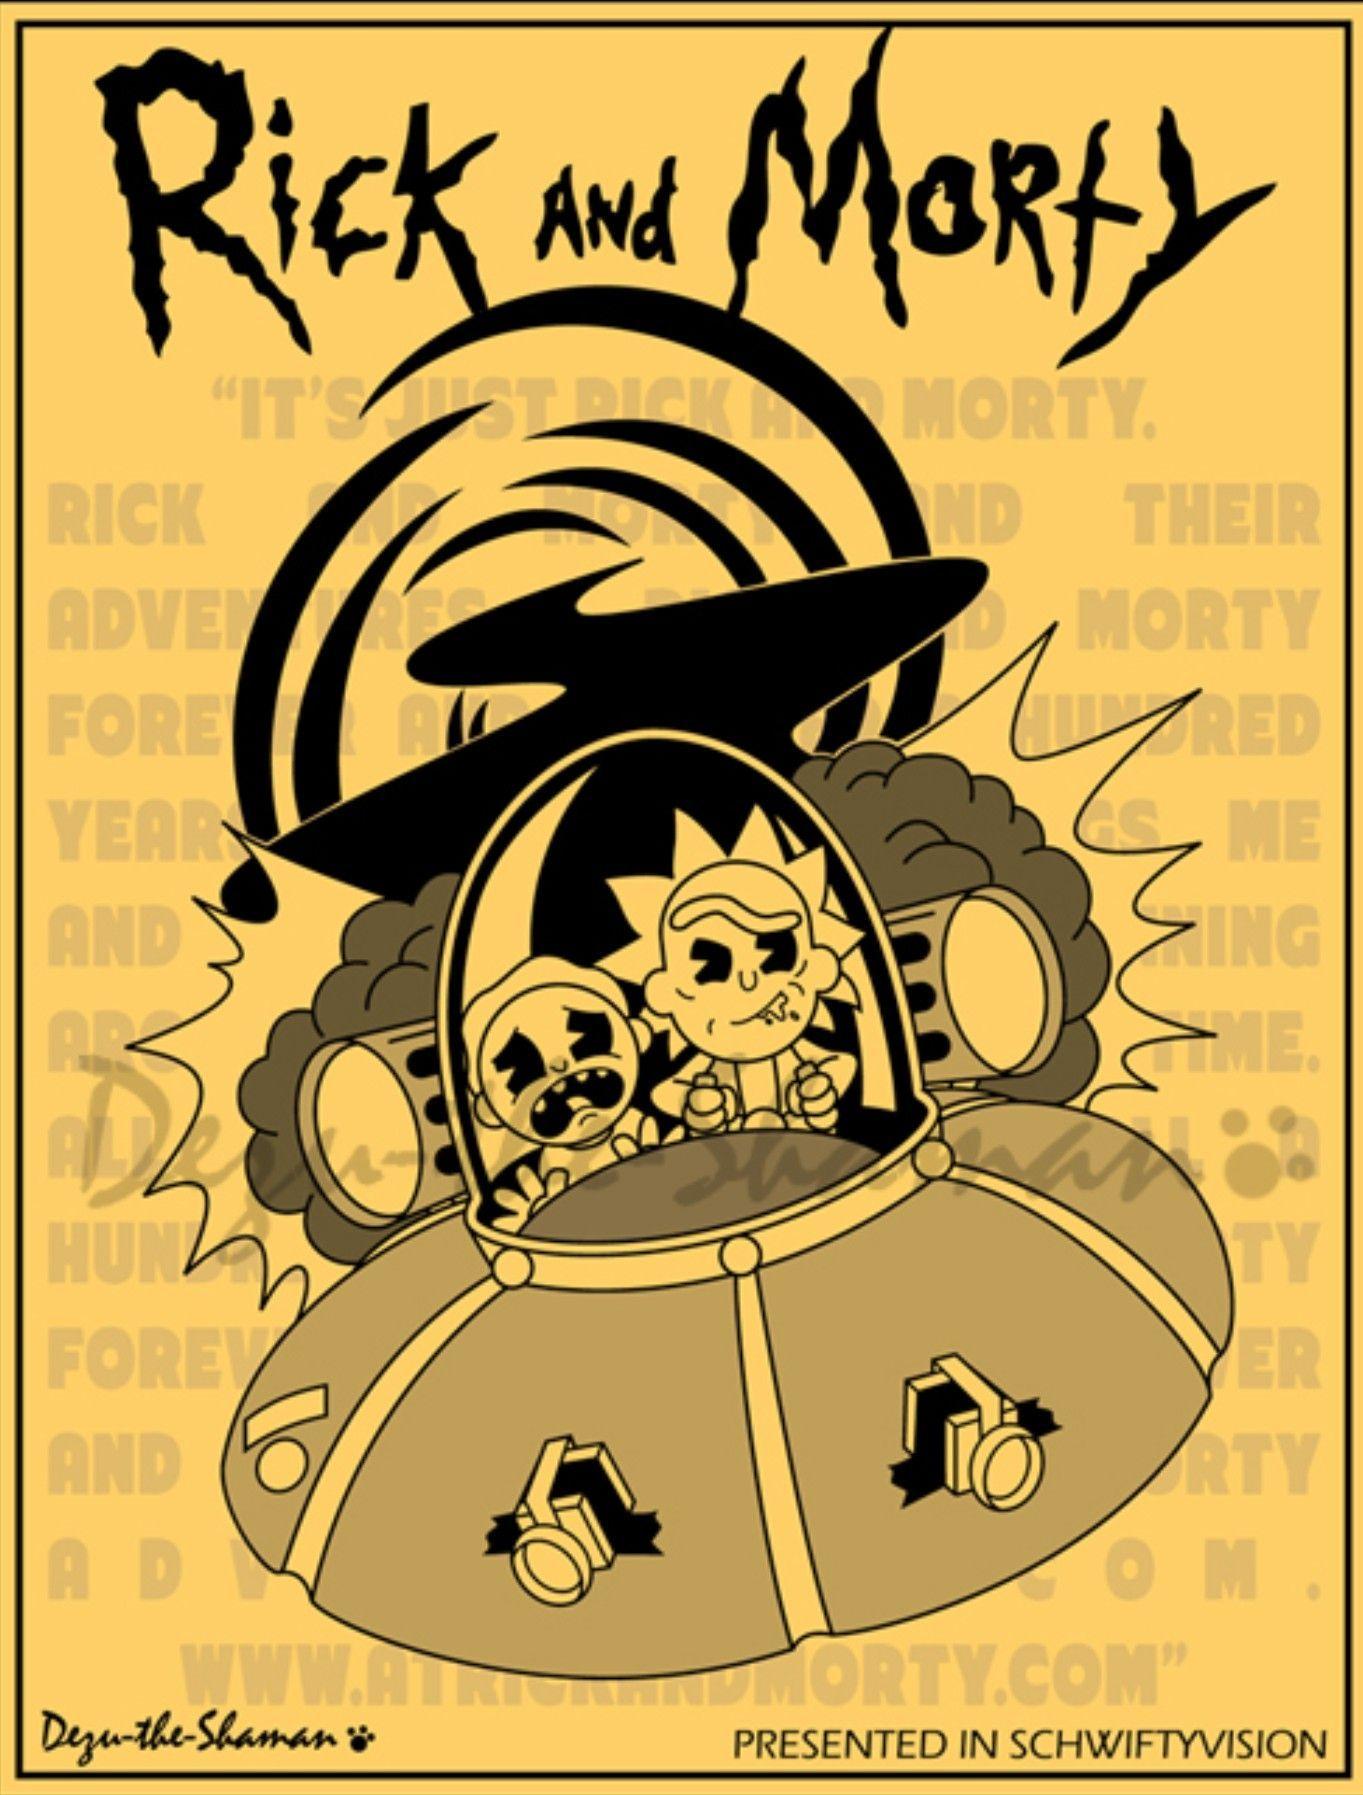 Rick and Morty- Poster reminds me of Bendy and the Ink Machine